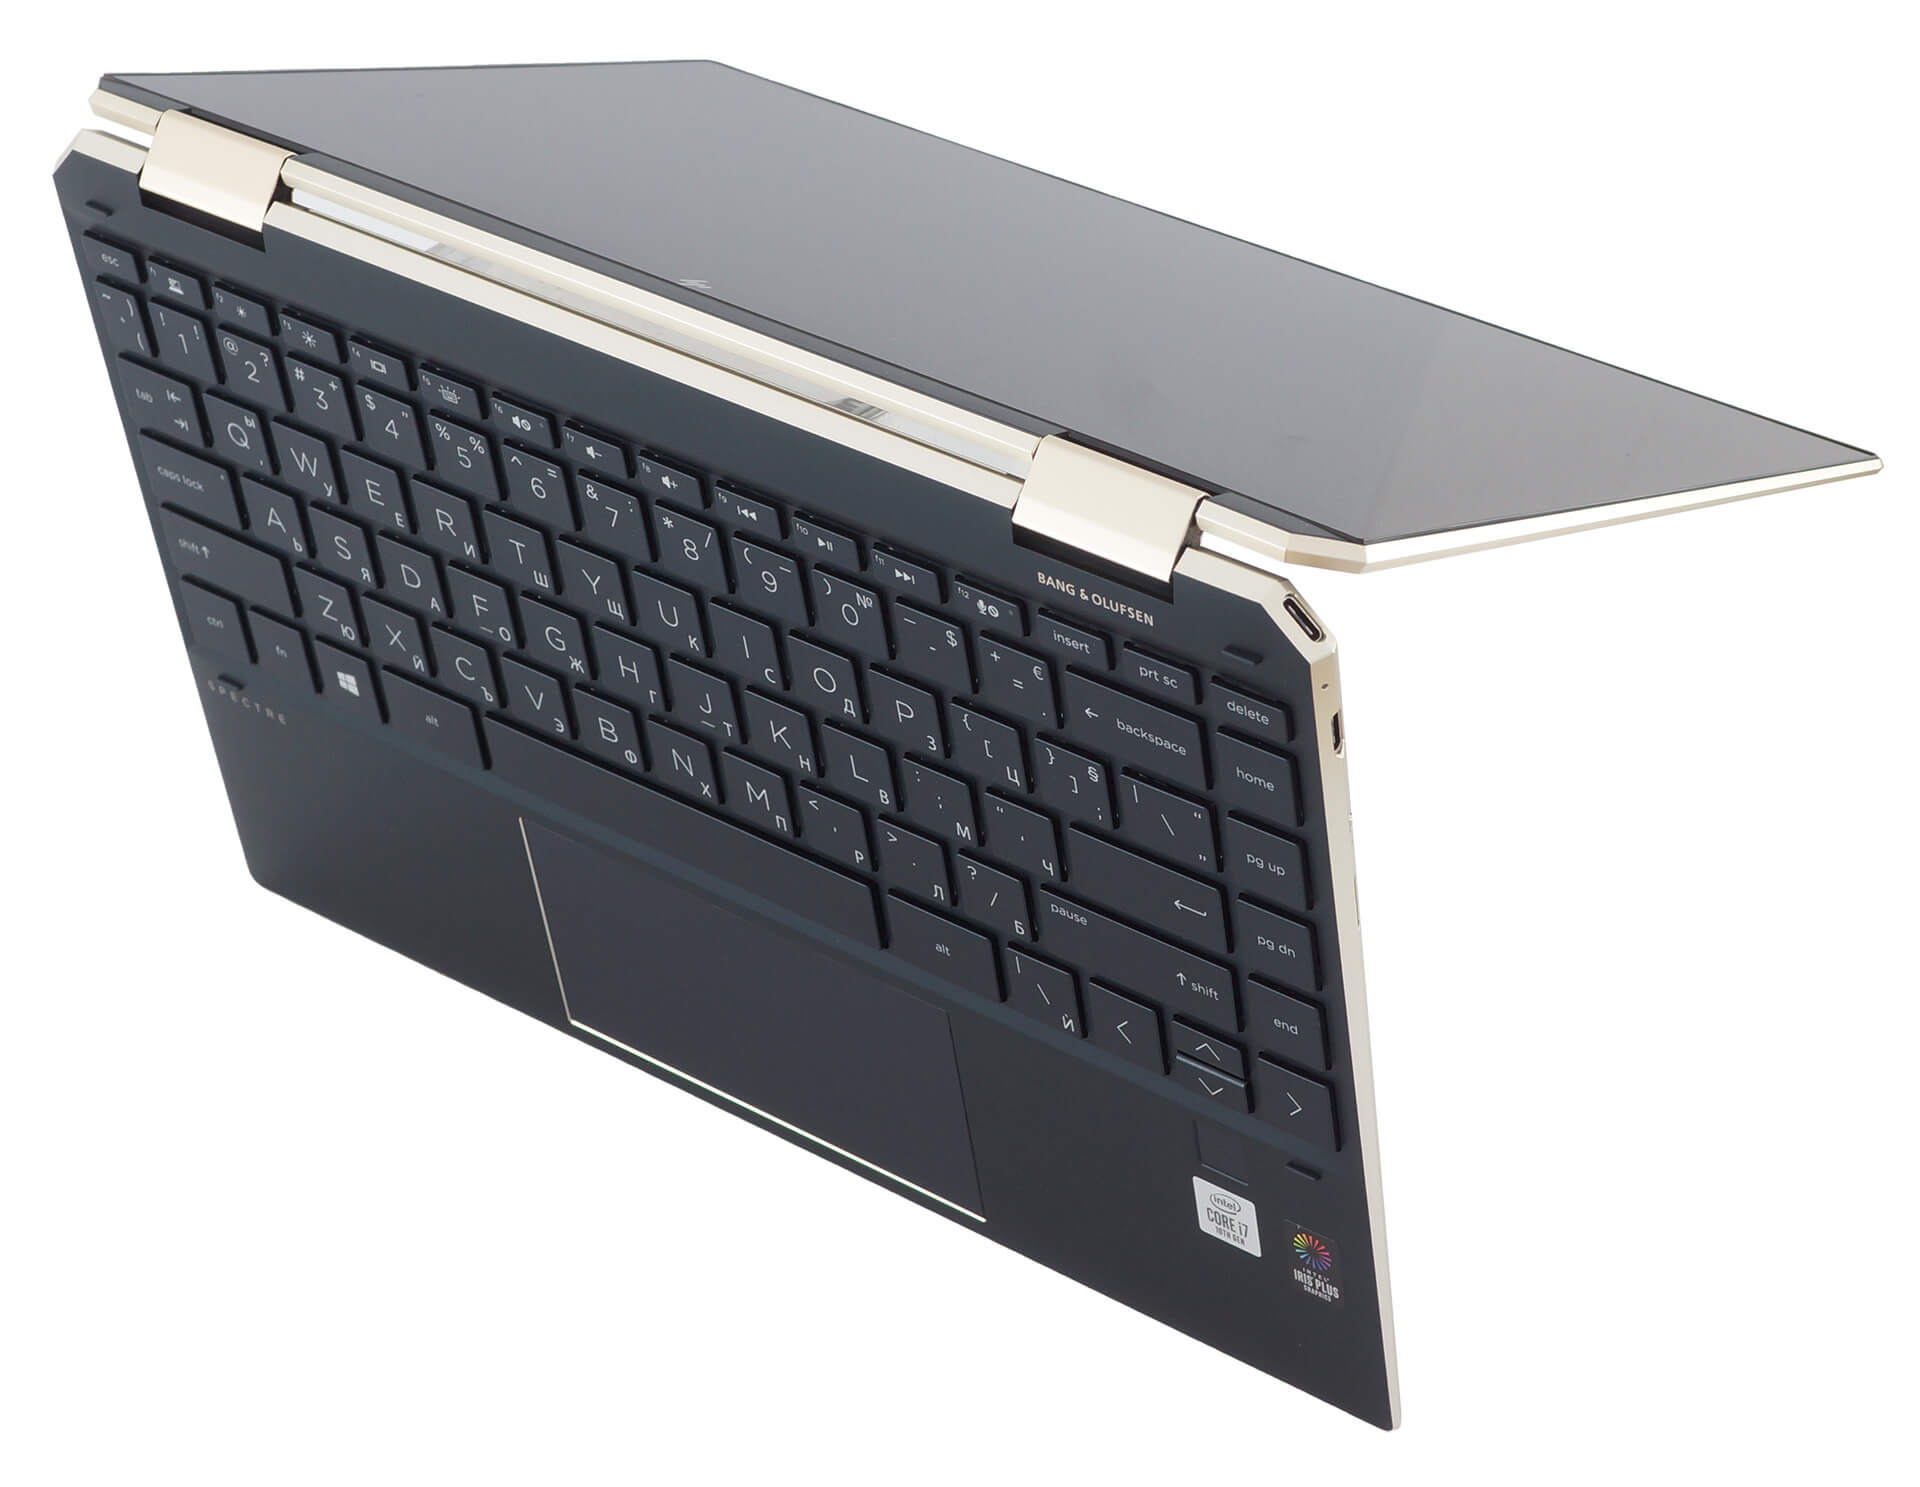 HP Spectre x360 13 (13-aw0000) review - the jewel in the 2-in-1 crown |  LaptopMedia Canada